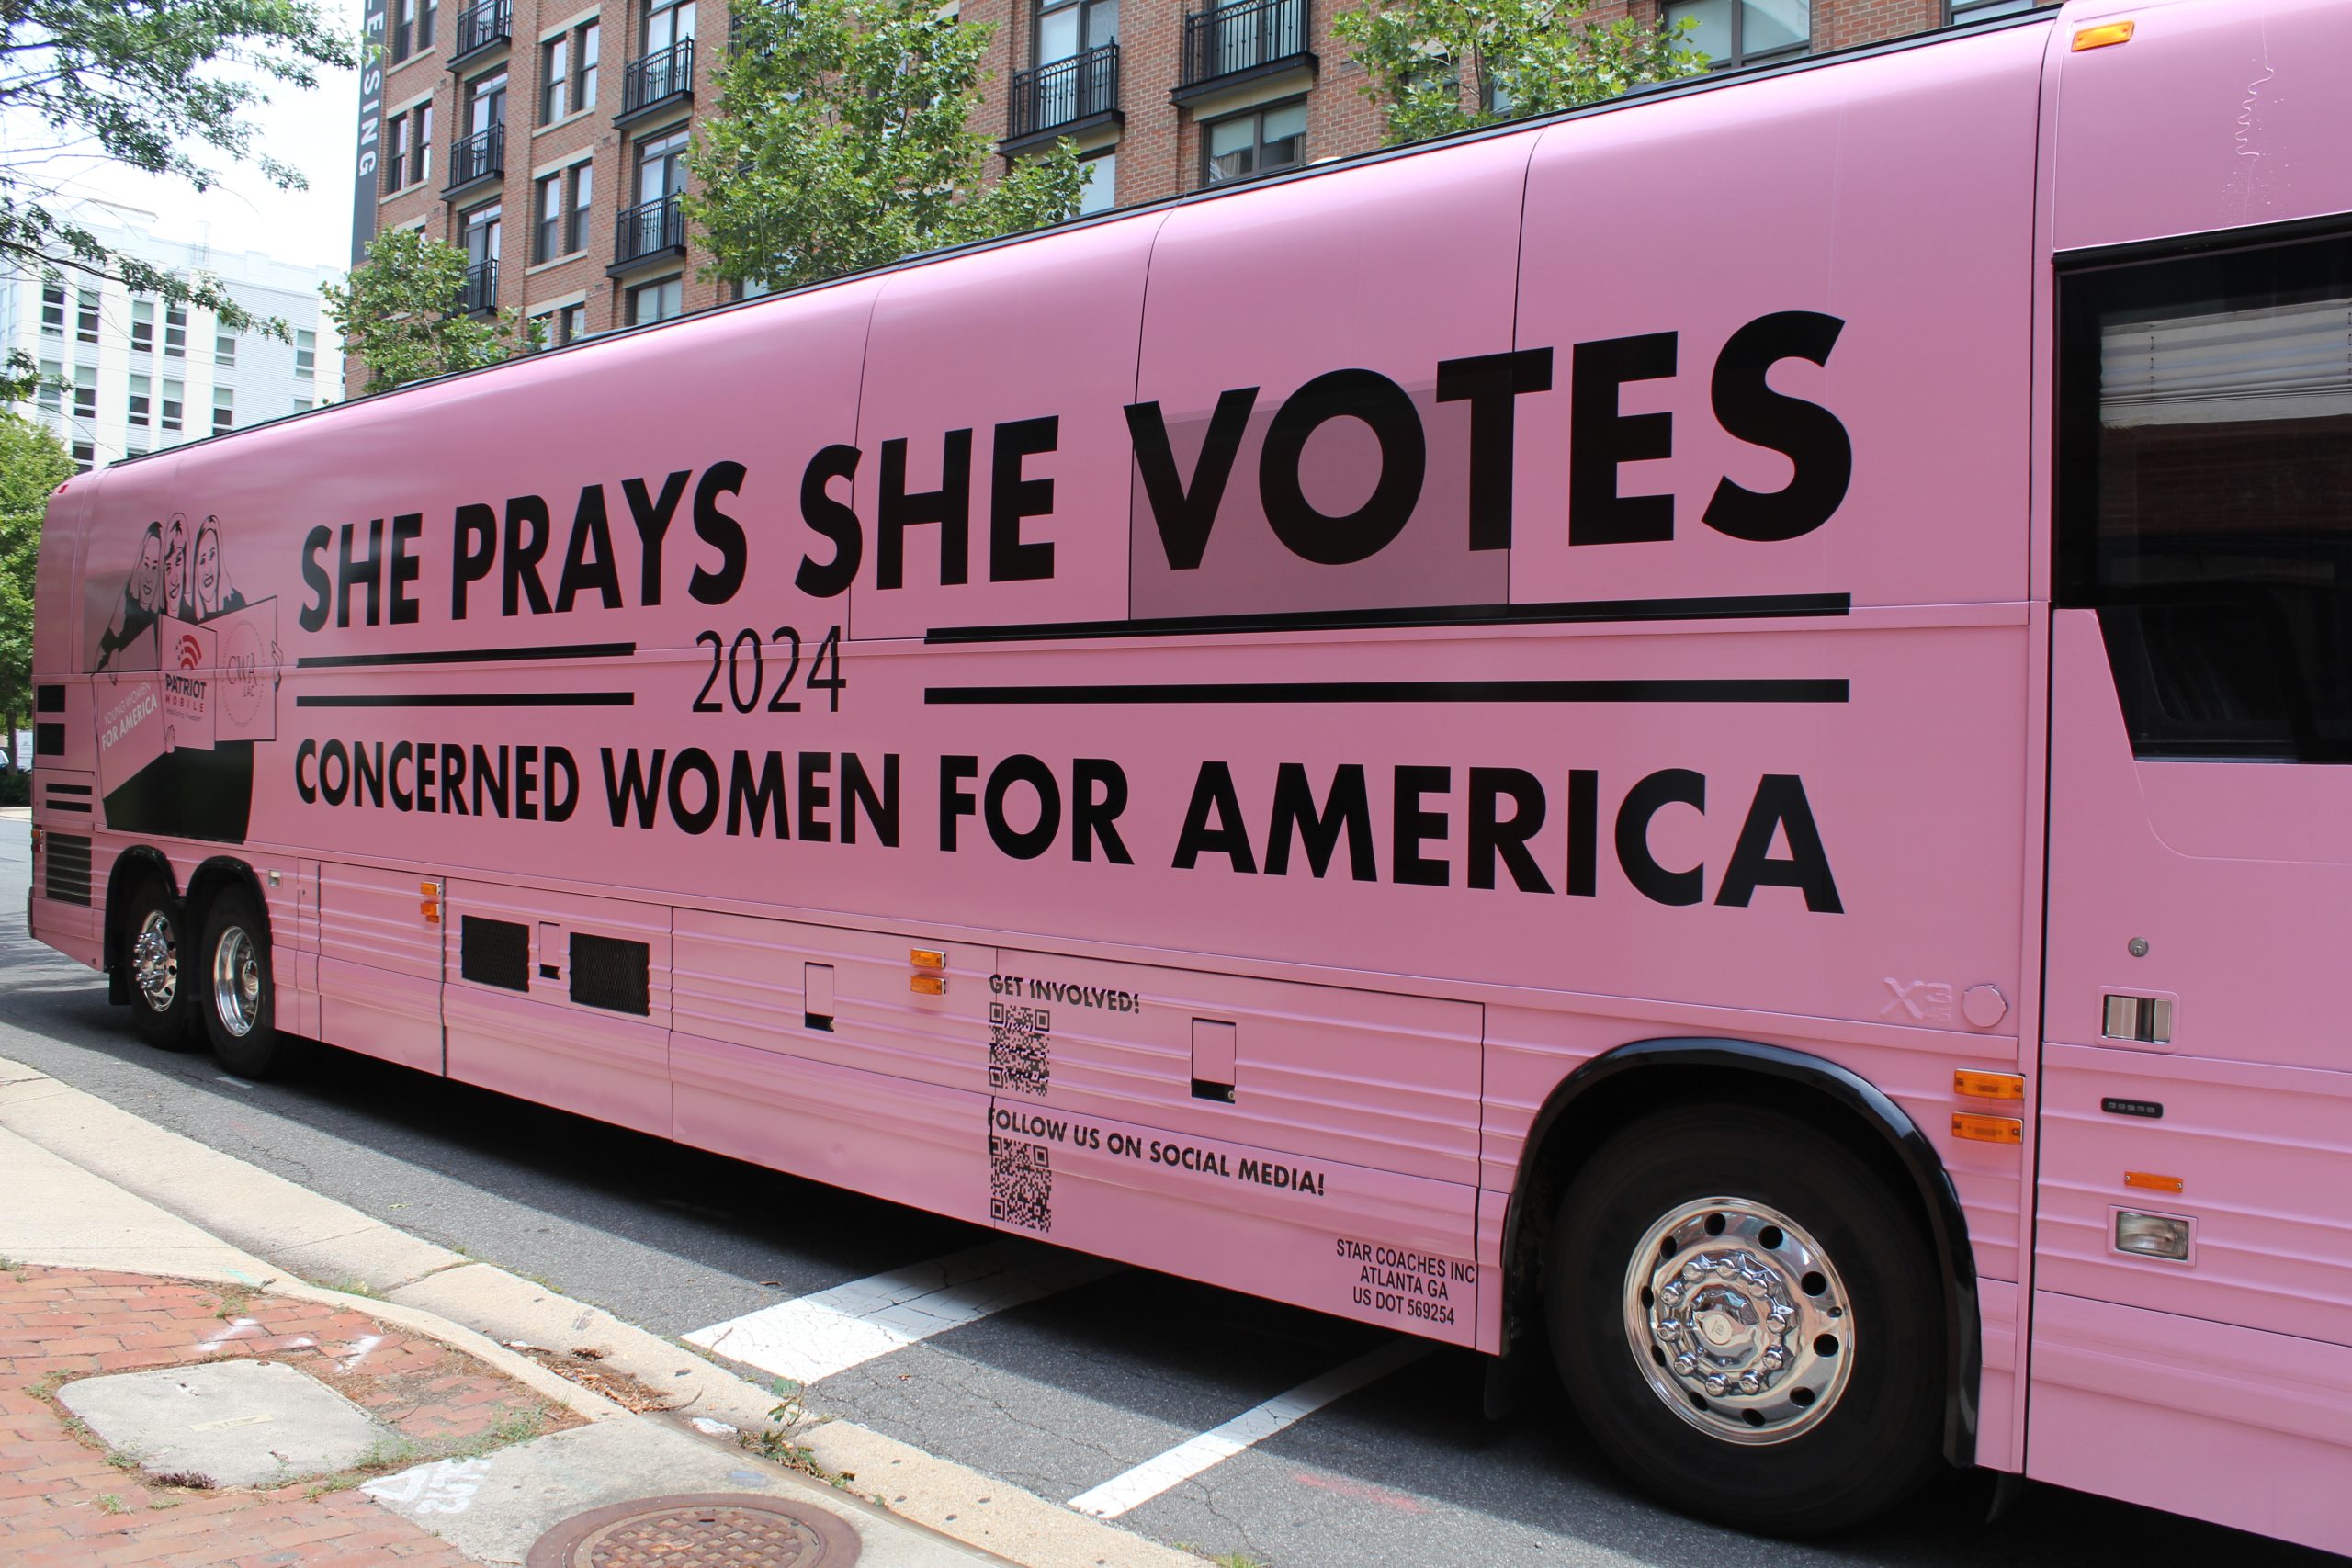 The Big Pink Bus is Coming to Forest, Virginia!